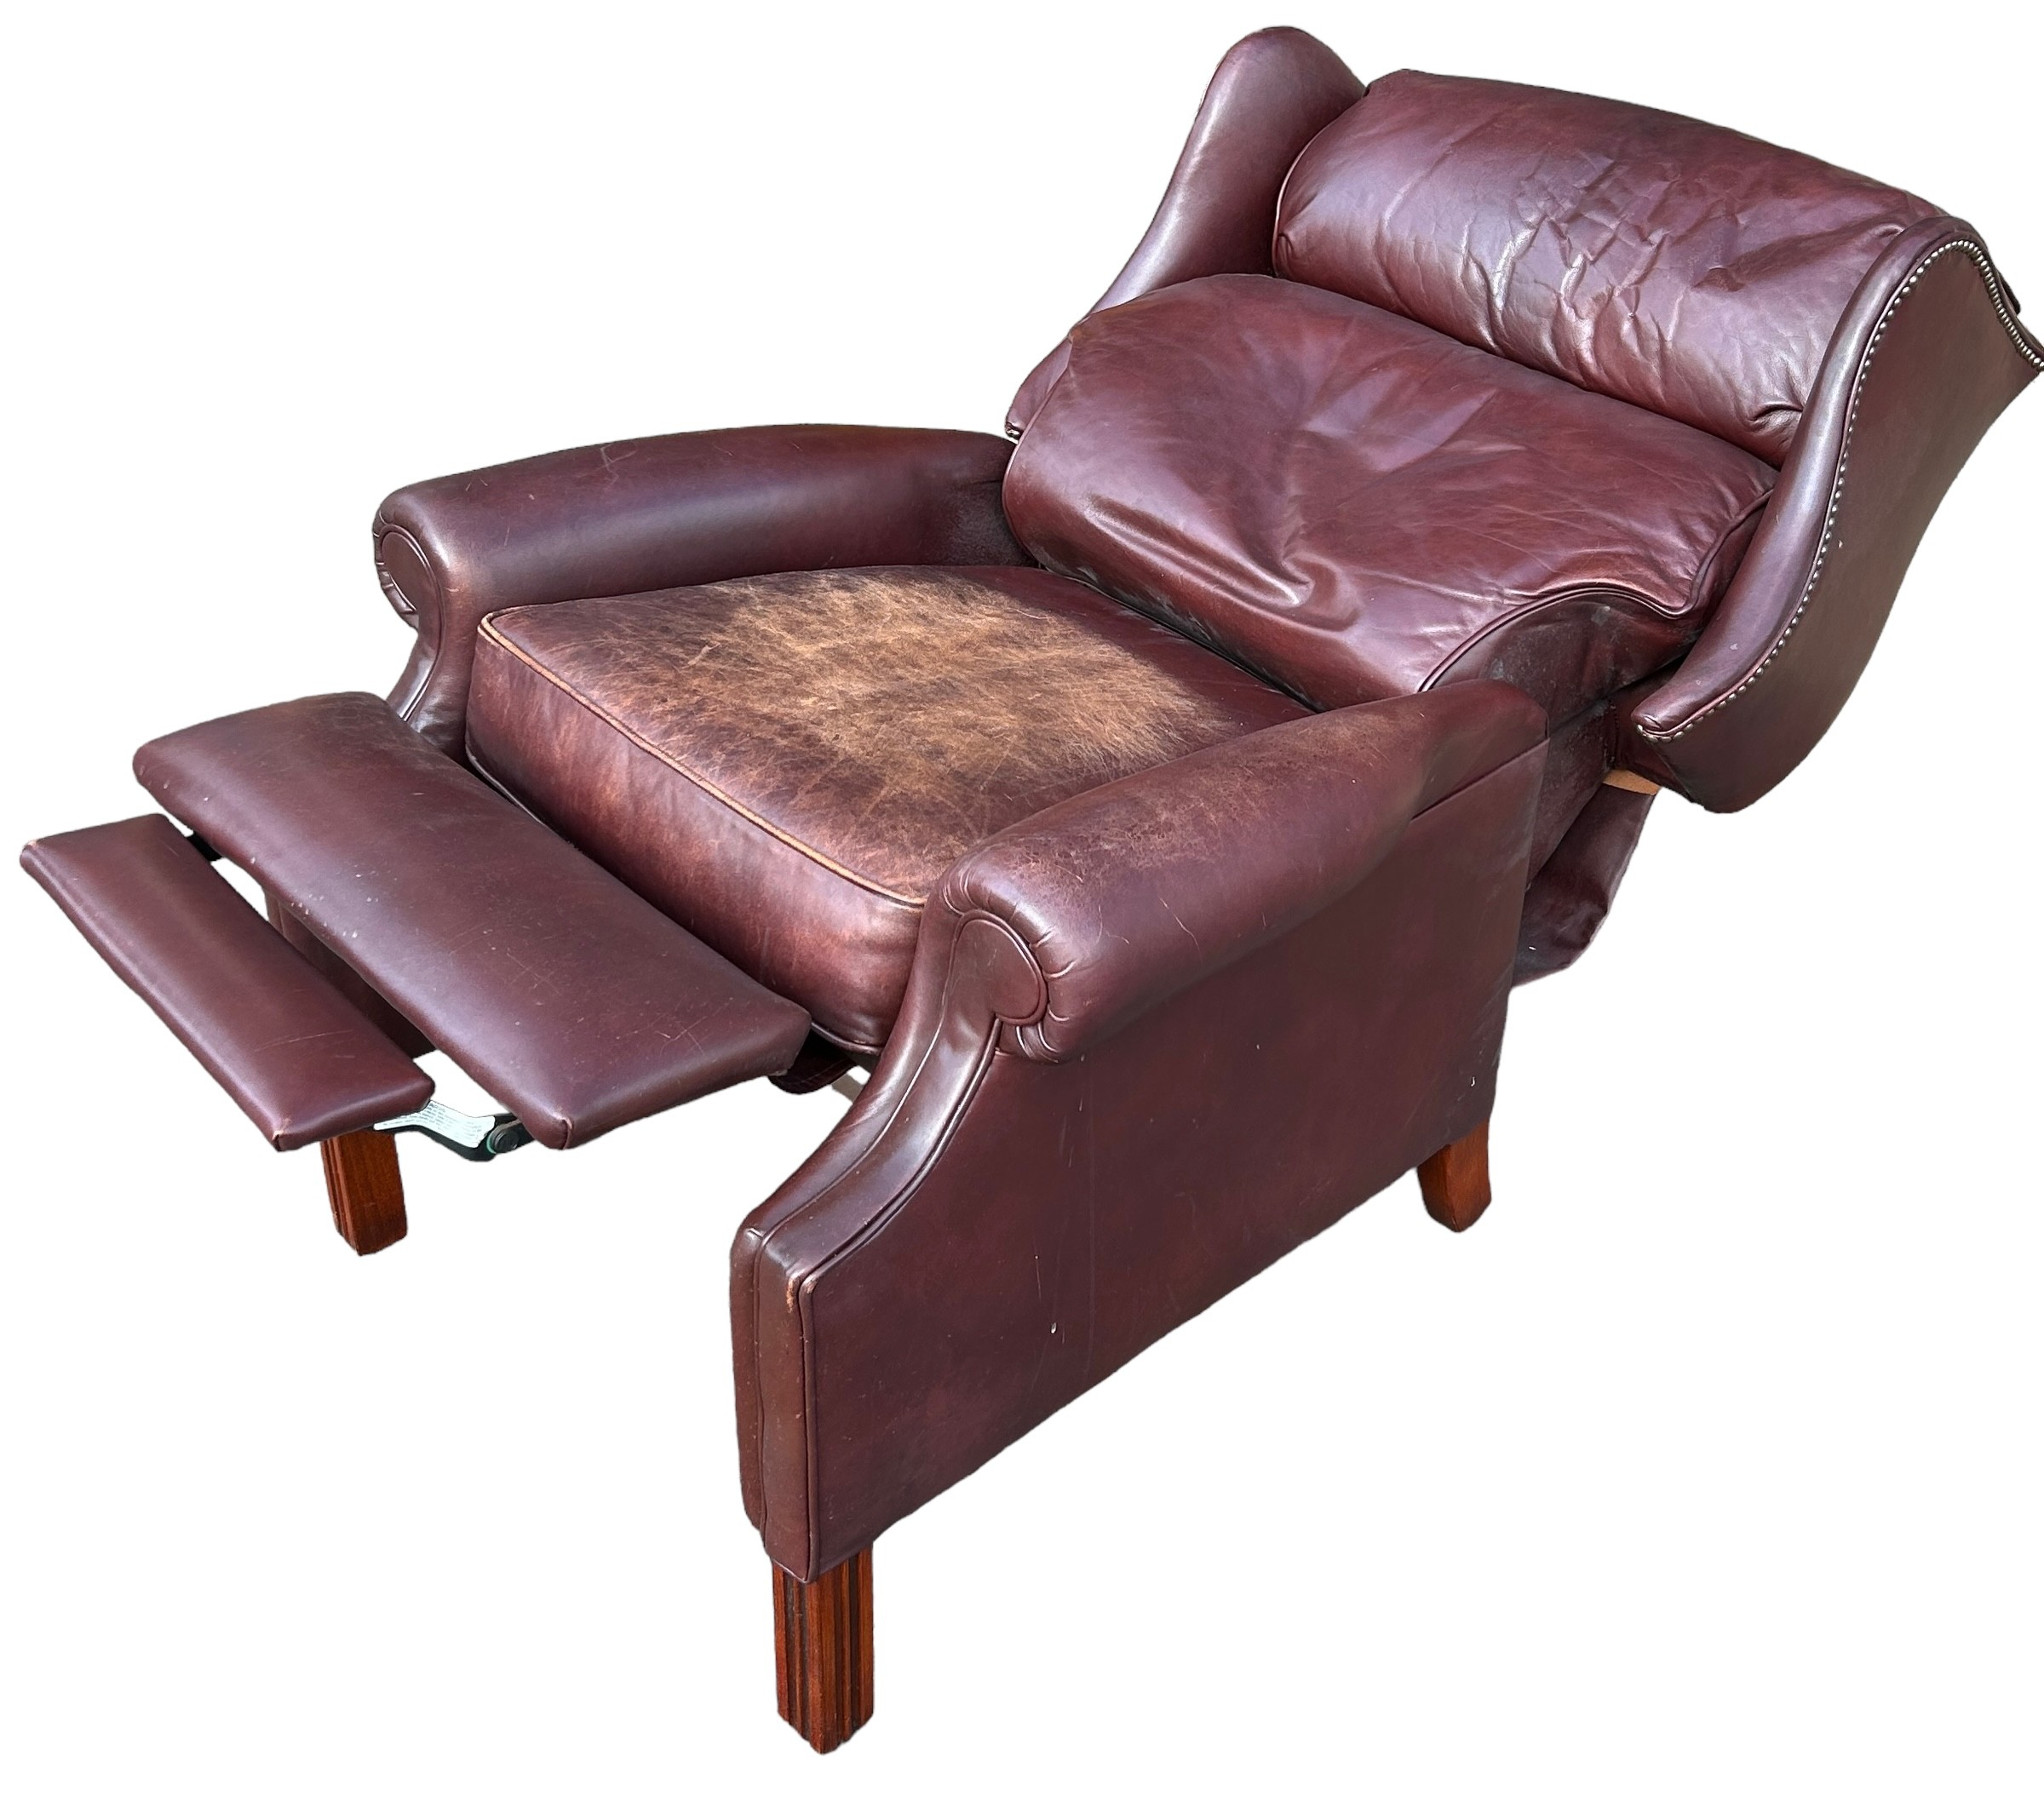 A HARRODS LONDON BROWN LEATHER RECLINING ARMCHAIR, 105cm x 85cm x 75cm - Image 2 of 2